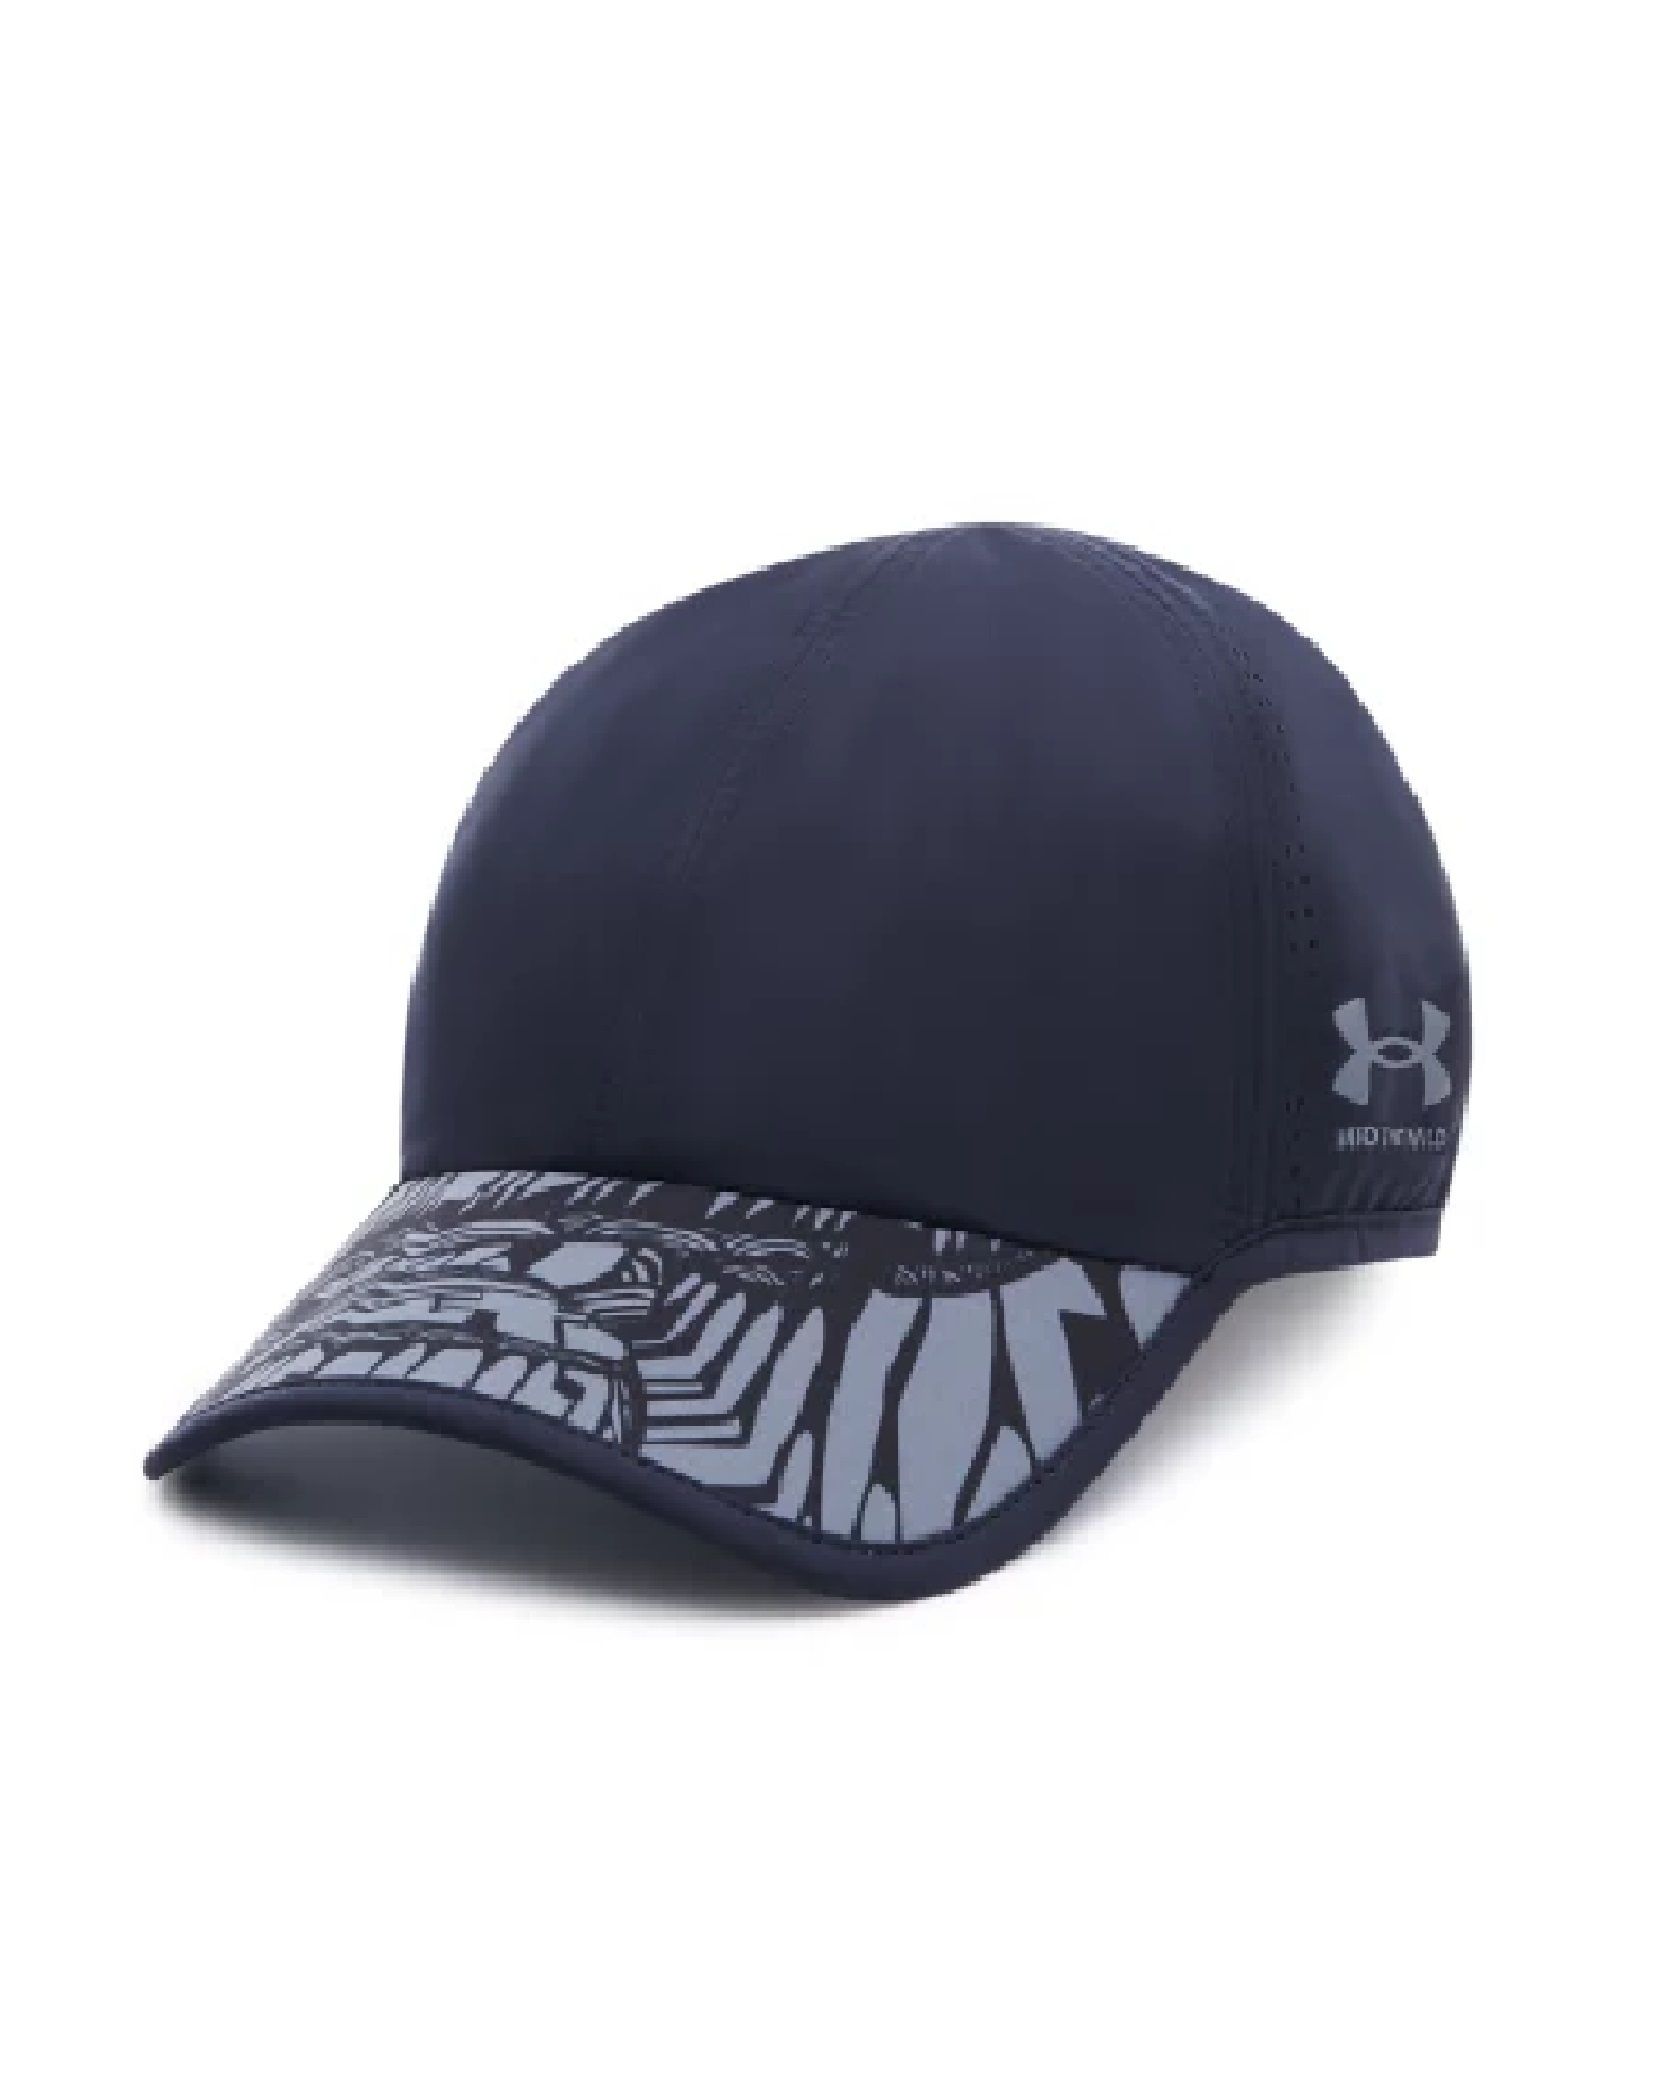 Under Armour Mens Chino Relaxed Sport Hat Cap Golf Nepal